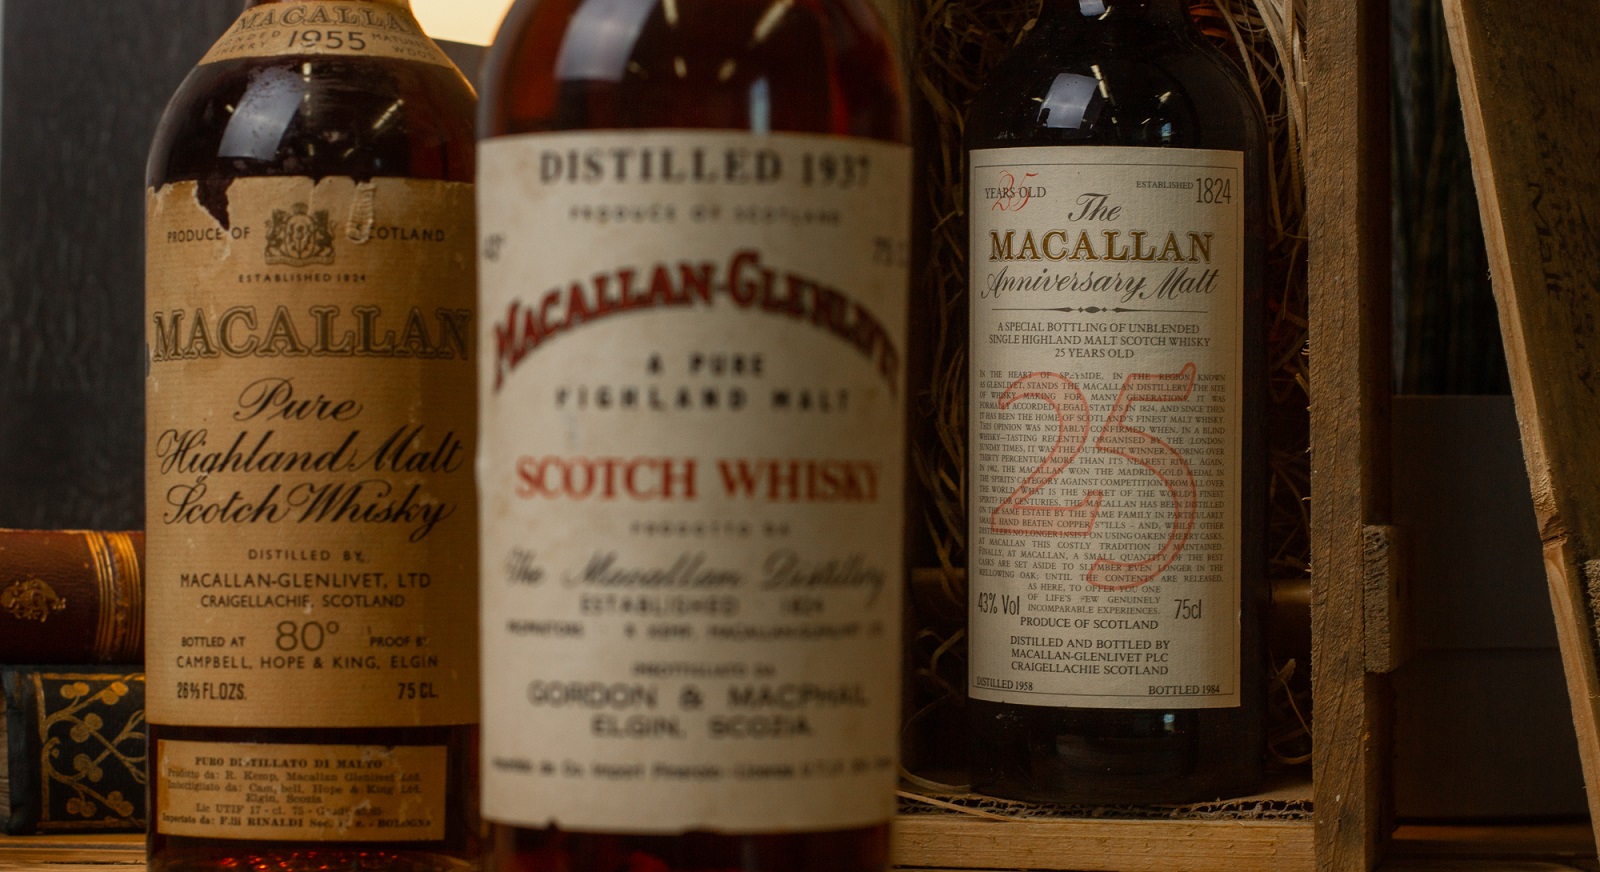 What is Macallan whisky worth?